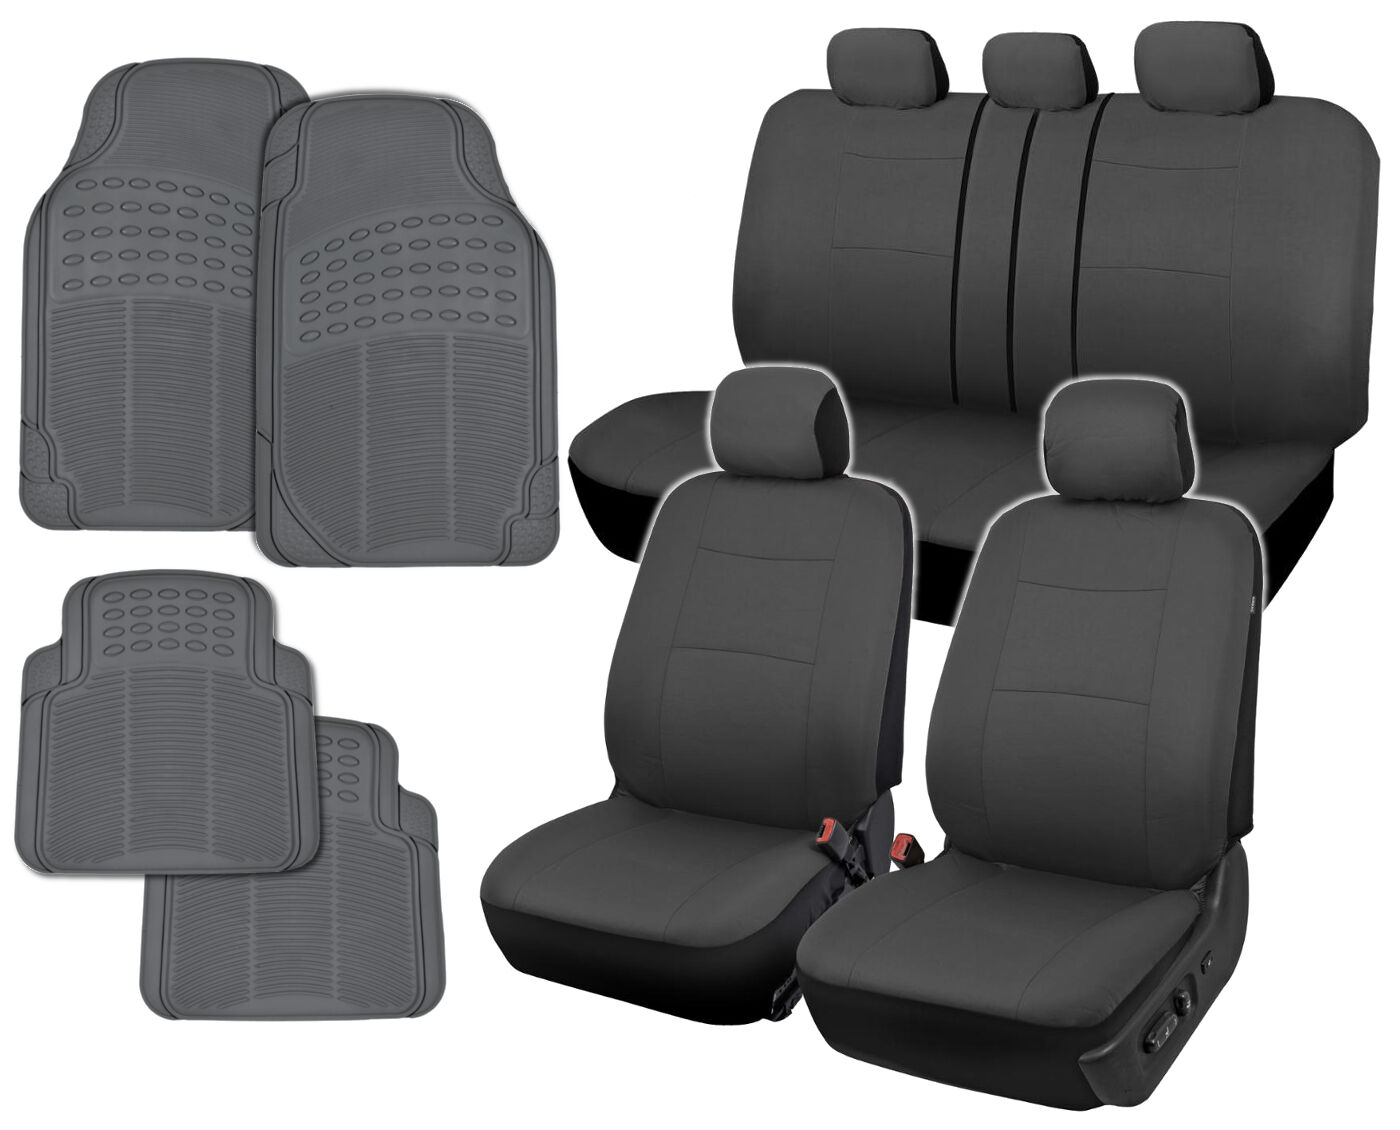 Gray Car Seat Covers & Rubber Floor Mats for Auto Heavy Duty Protection